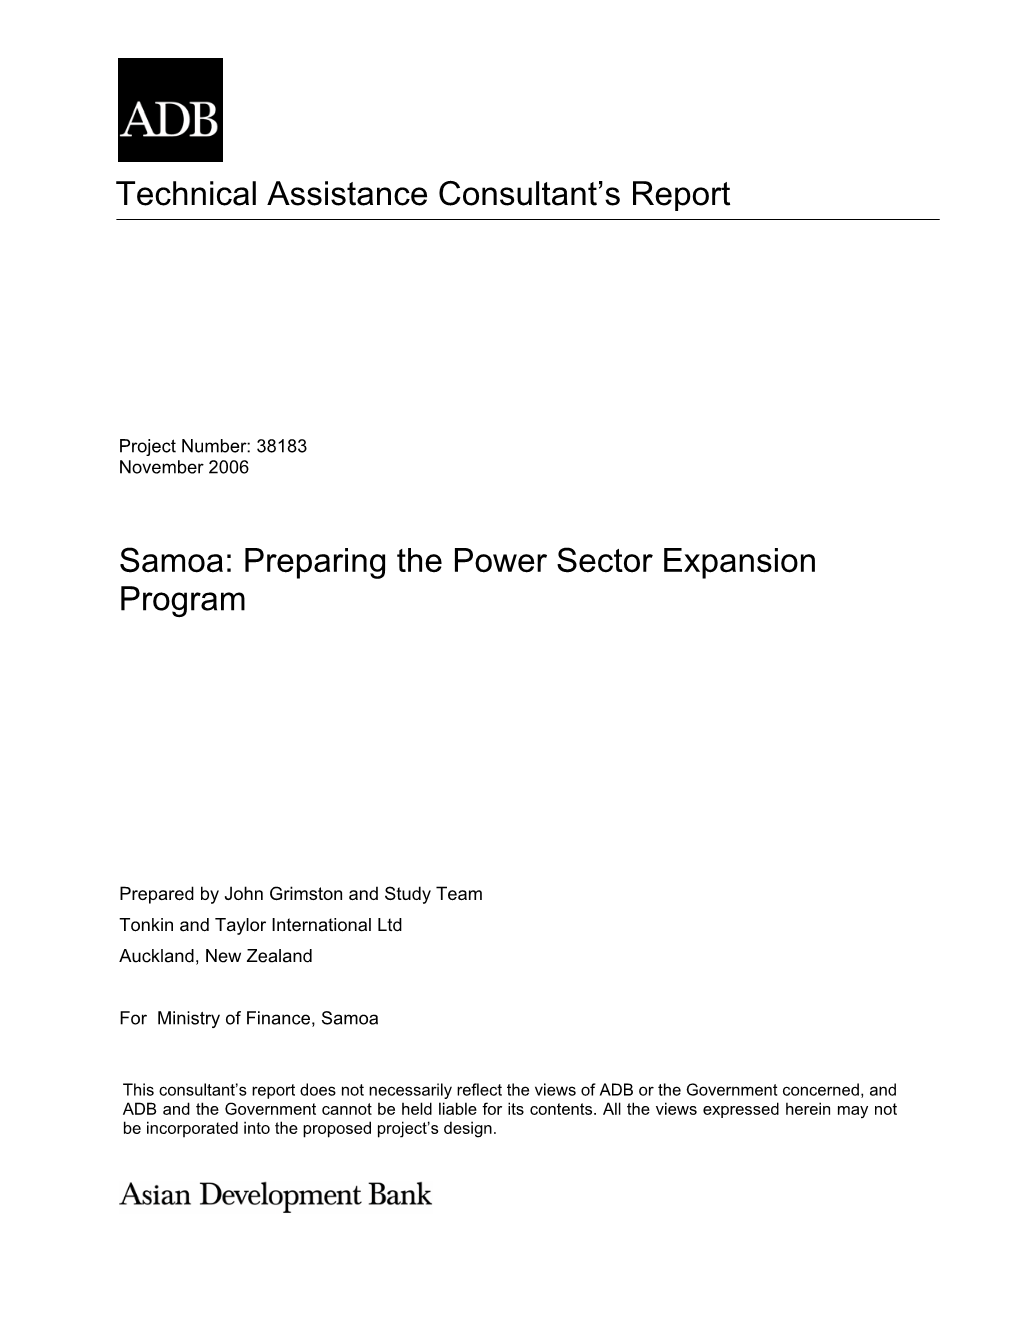 Preparing the Power Sector Expansion Program